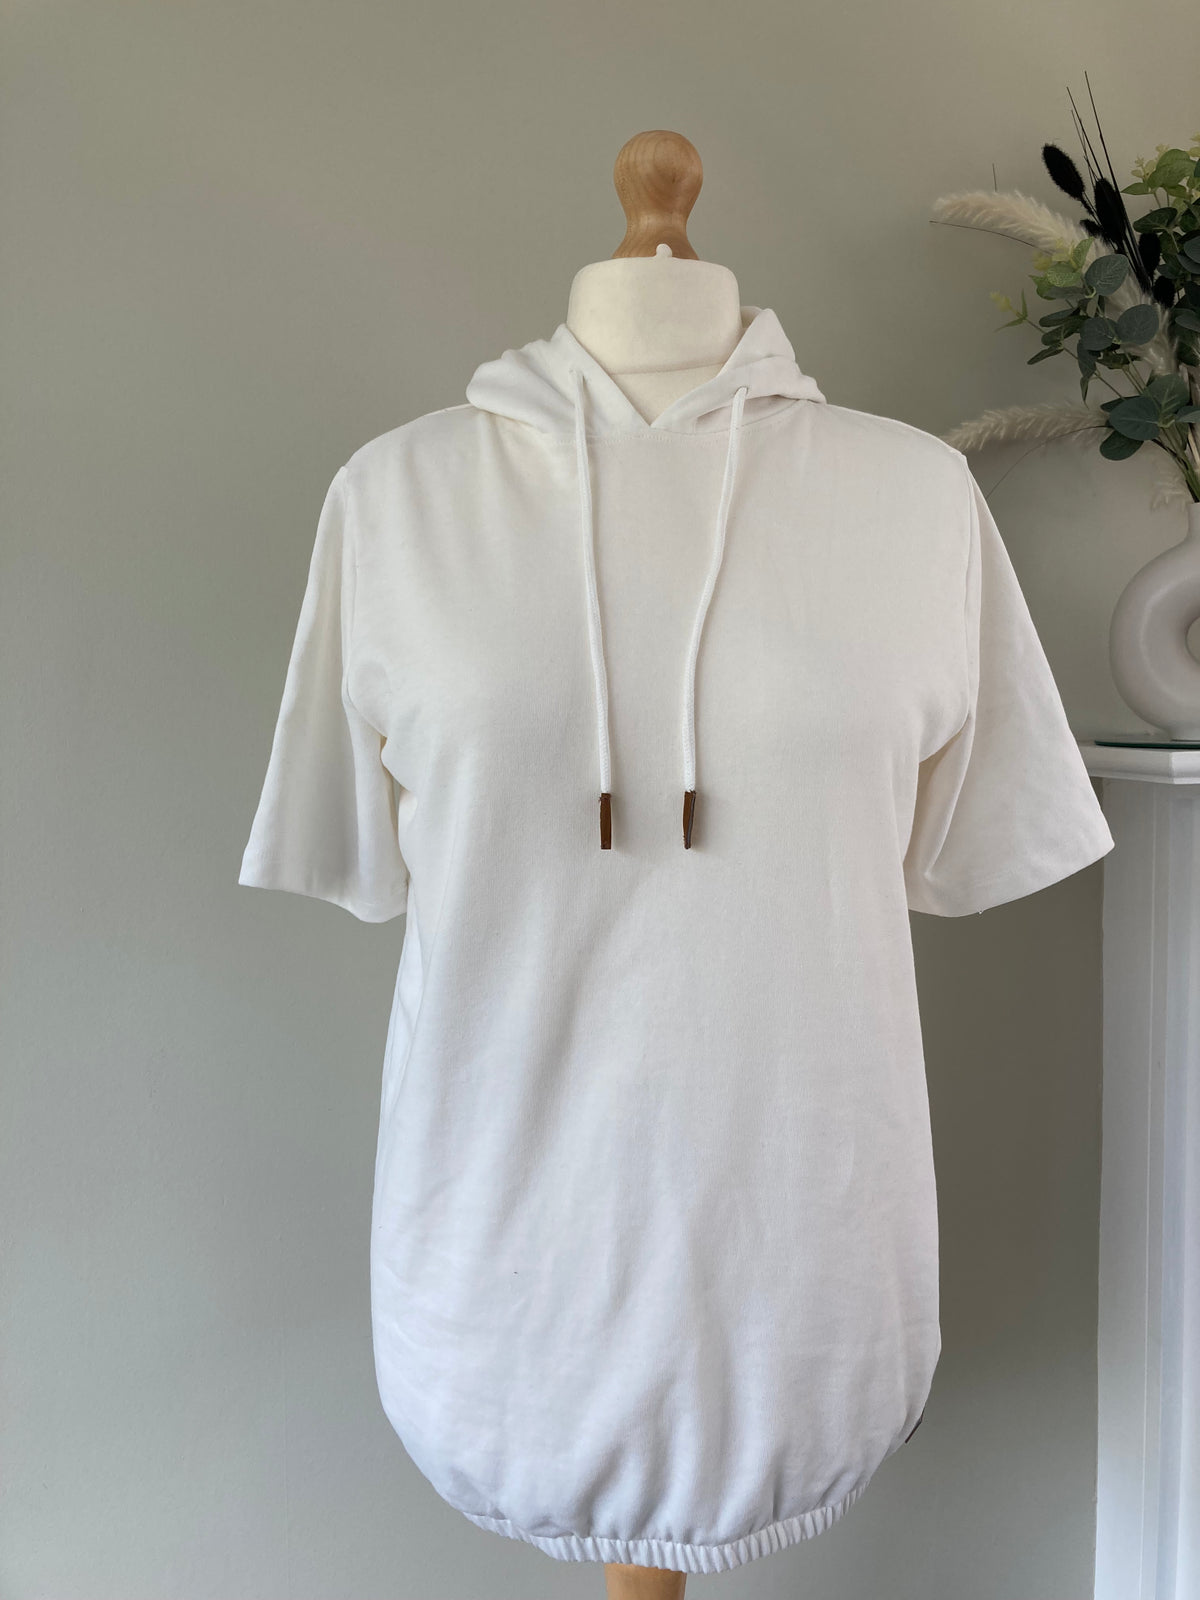 Ivory short sleeve top by JOHN BANER size 12